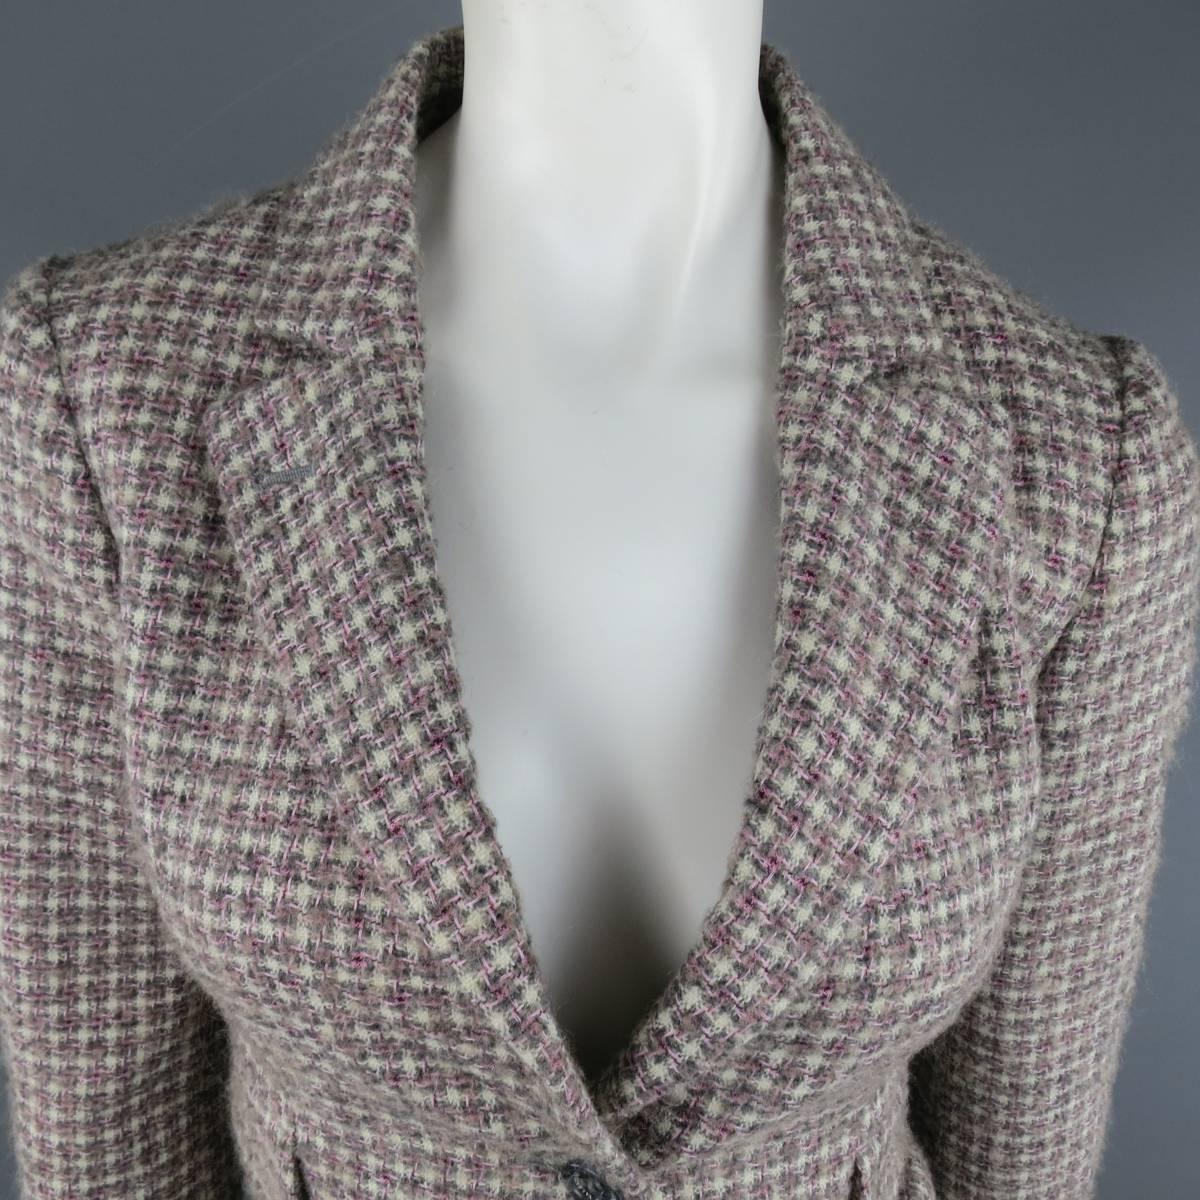 RED VALENTINO cropped blazer in gray, pink, and cream plaid wool blend tweed featuring a two button closure, peak lapel, back bow detail. Made in Italy.
 
Excellent Pre-Owned Condition.
Marked: USA 2
 
Measurements:
 
Shoulder: 15 in.
Bust: 36